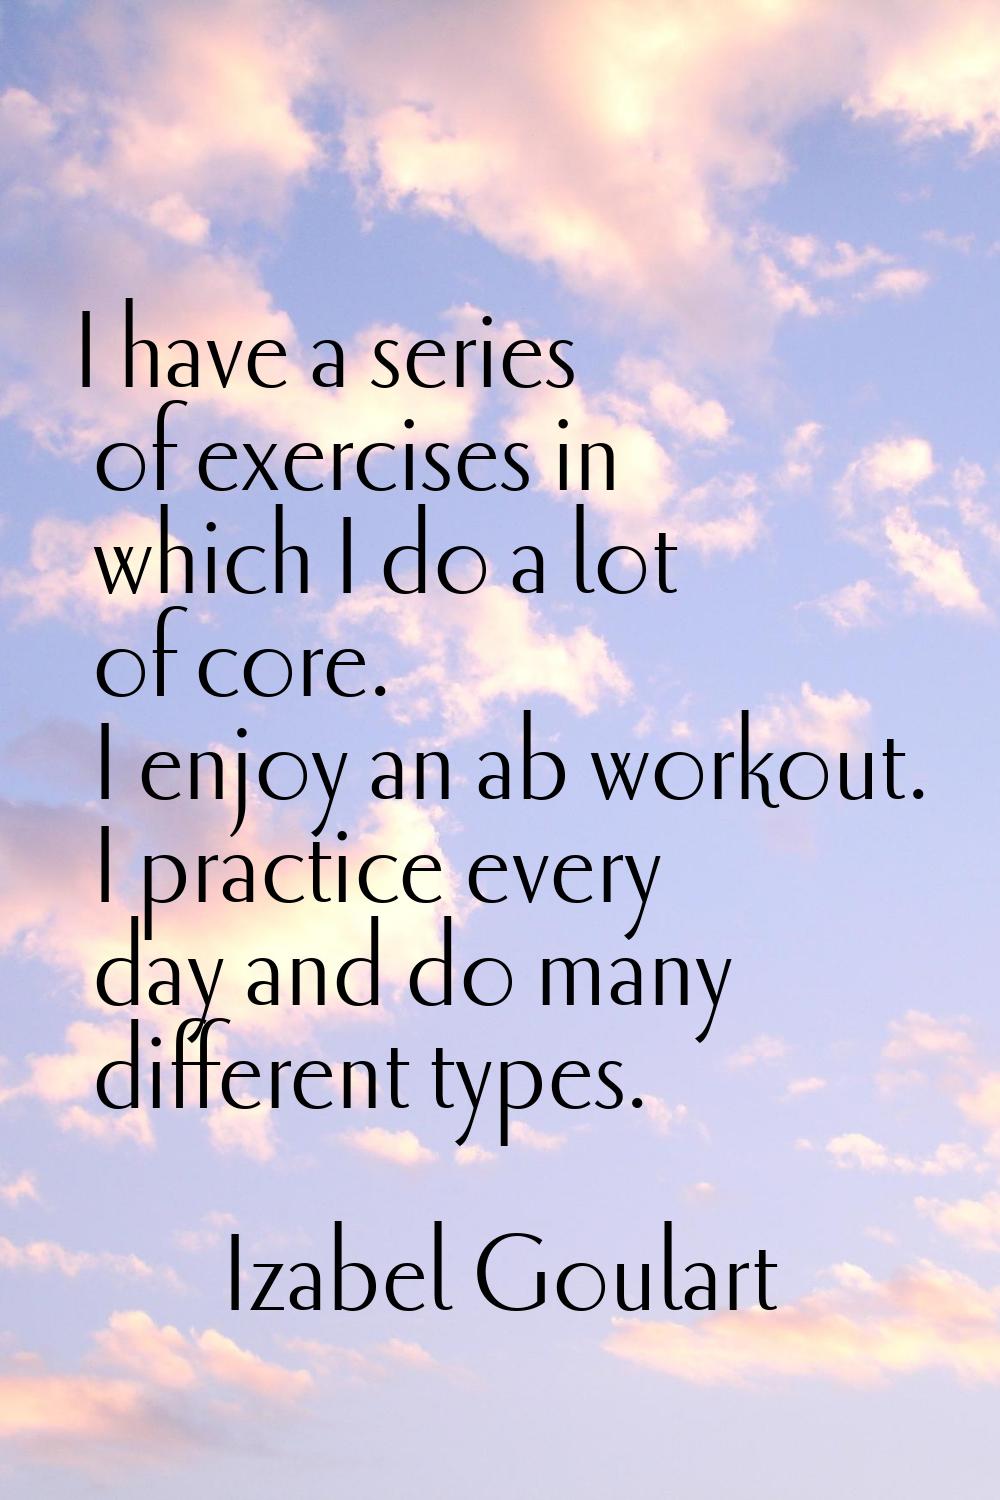 I have a series of exercises in which I do a lot of core. I enjoy an ab workout. I practice every d